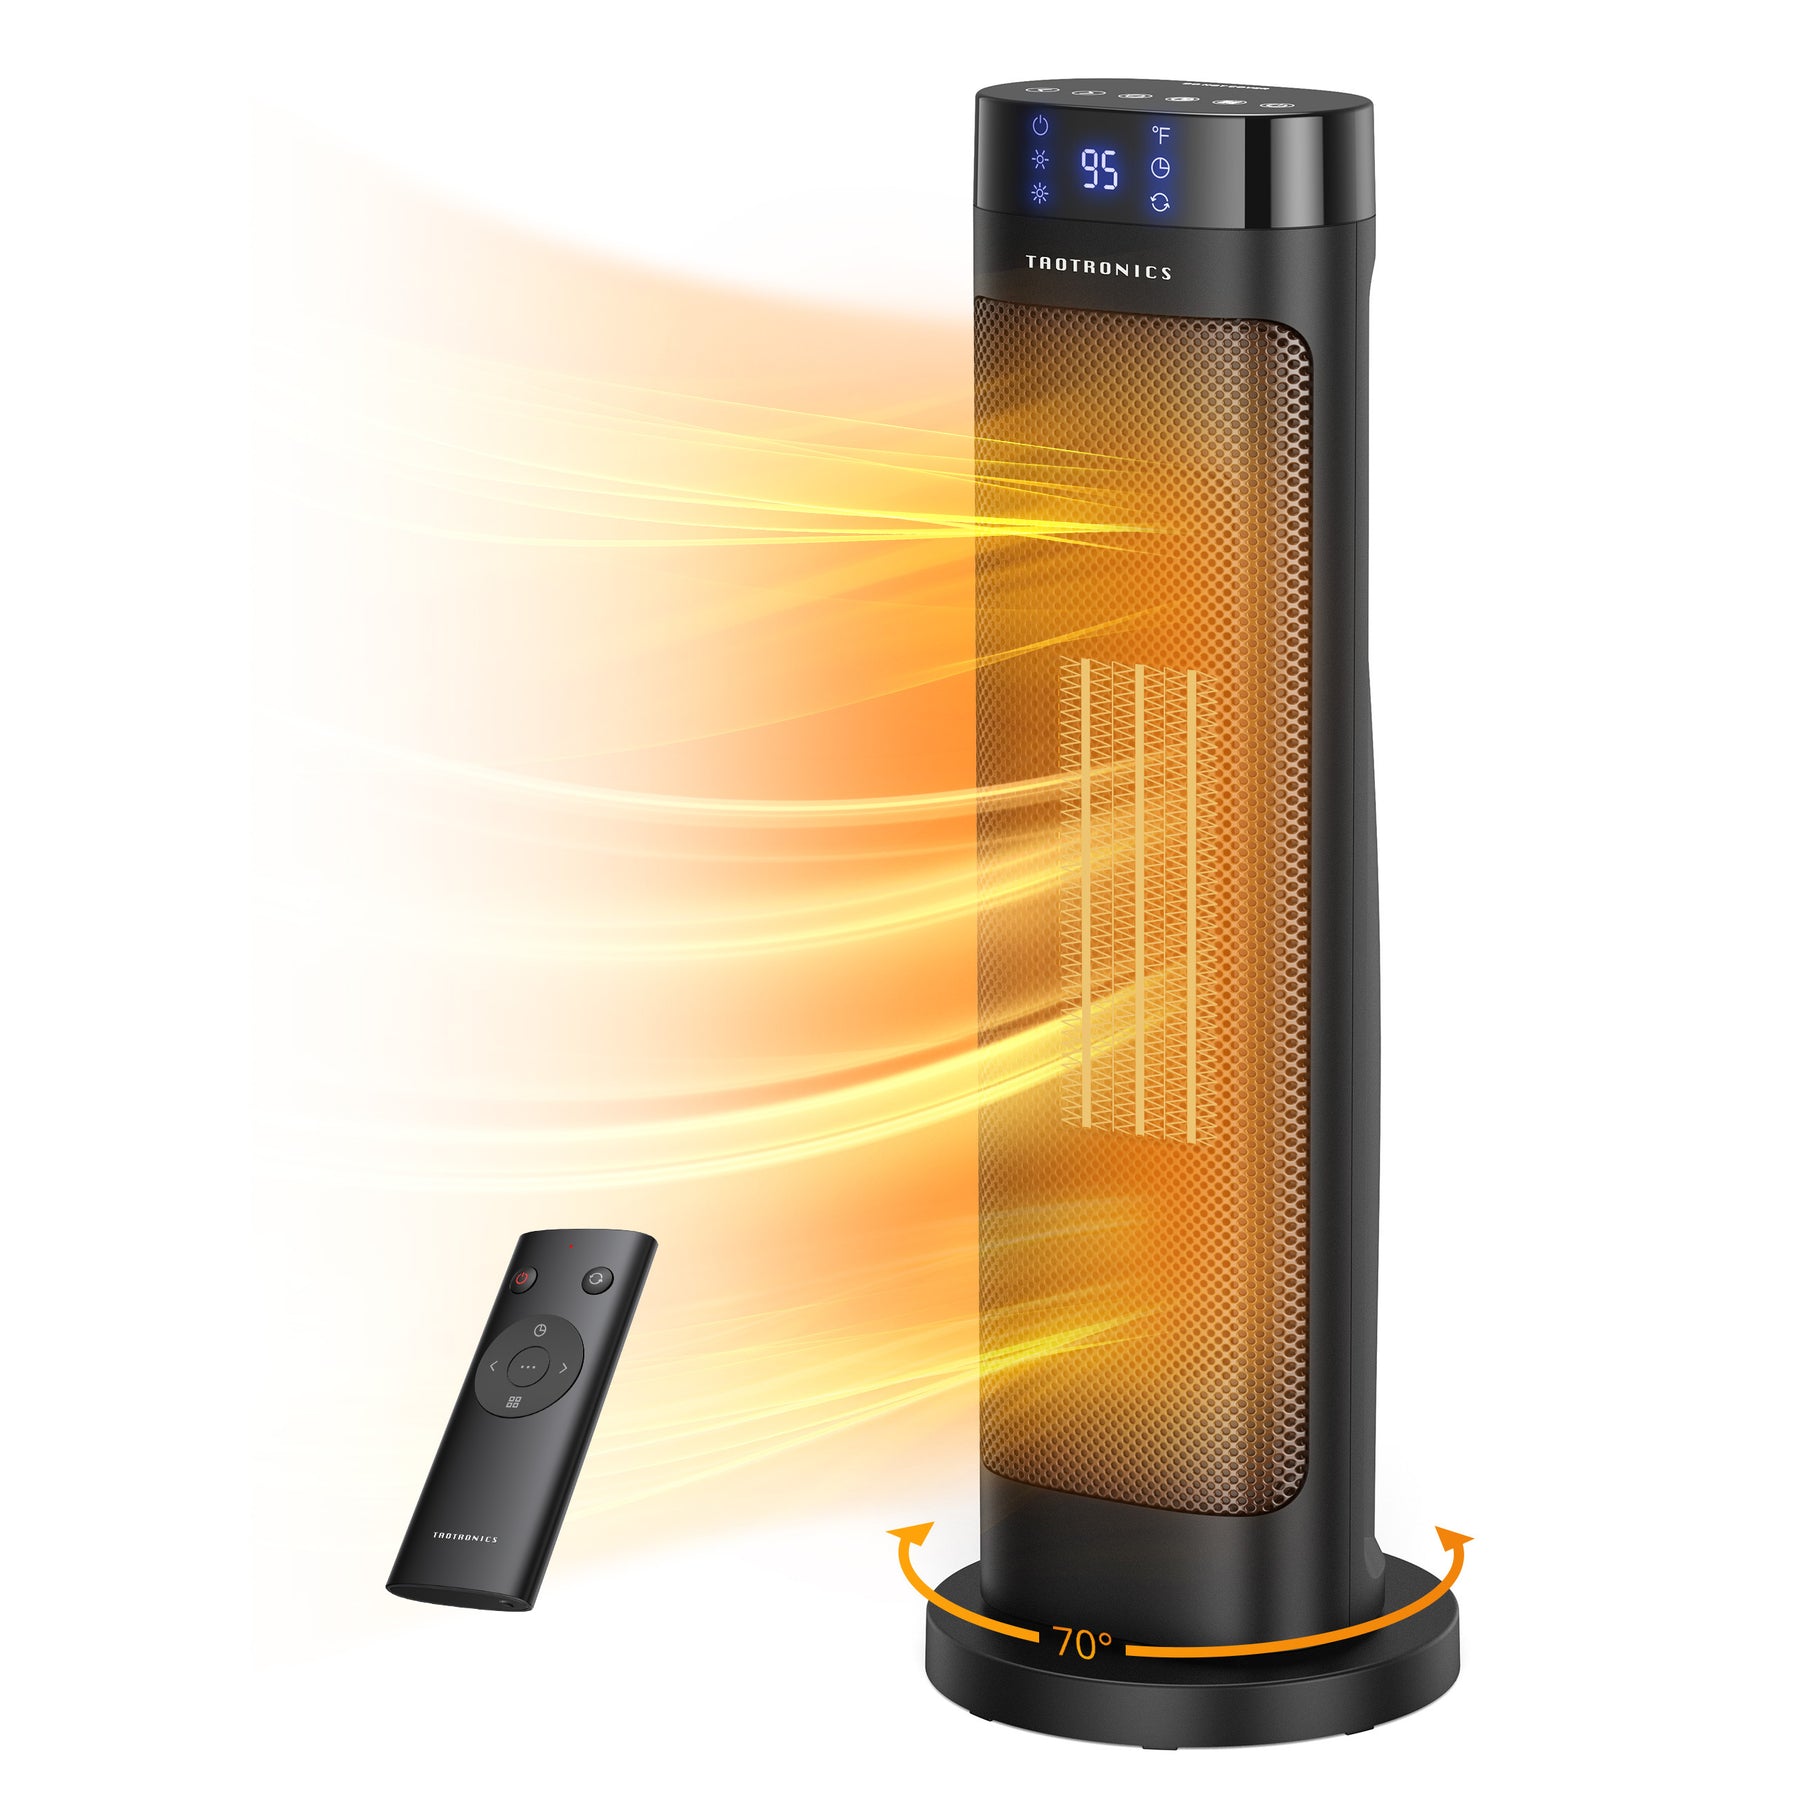 22” Tower Space Heater, 1500W Fast Ceramic Heating with 3 Adjustable Heat Levels